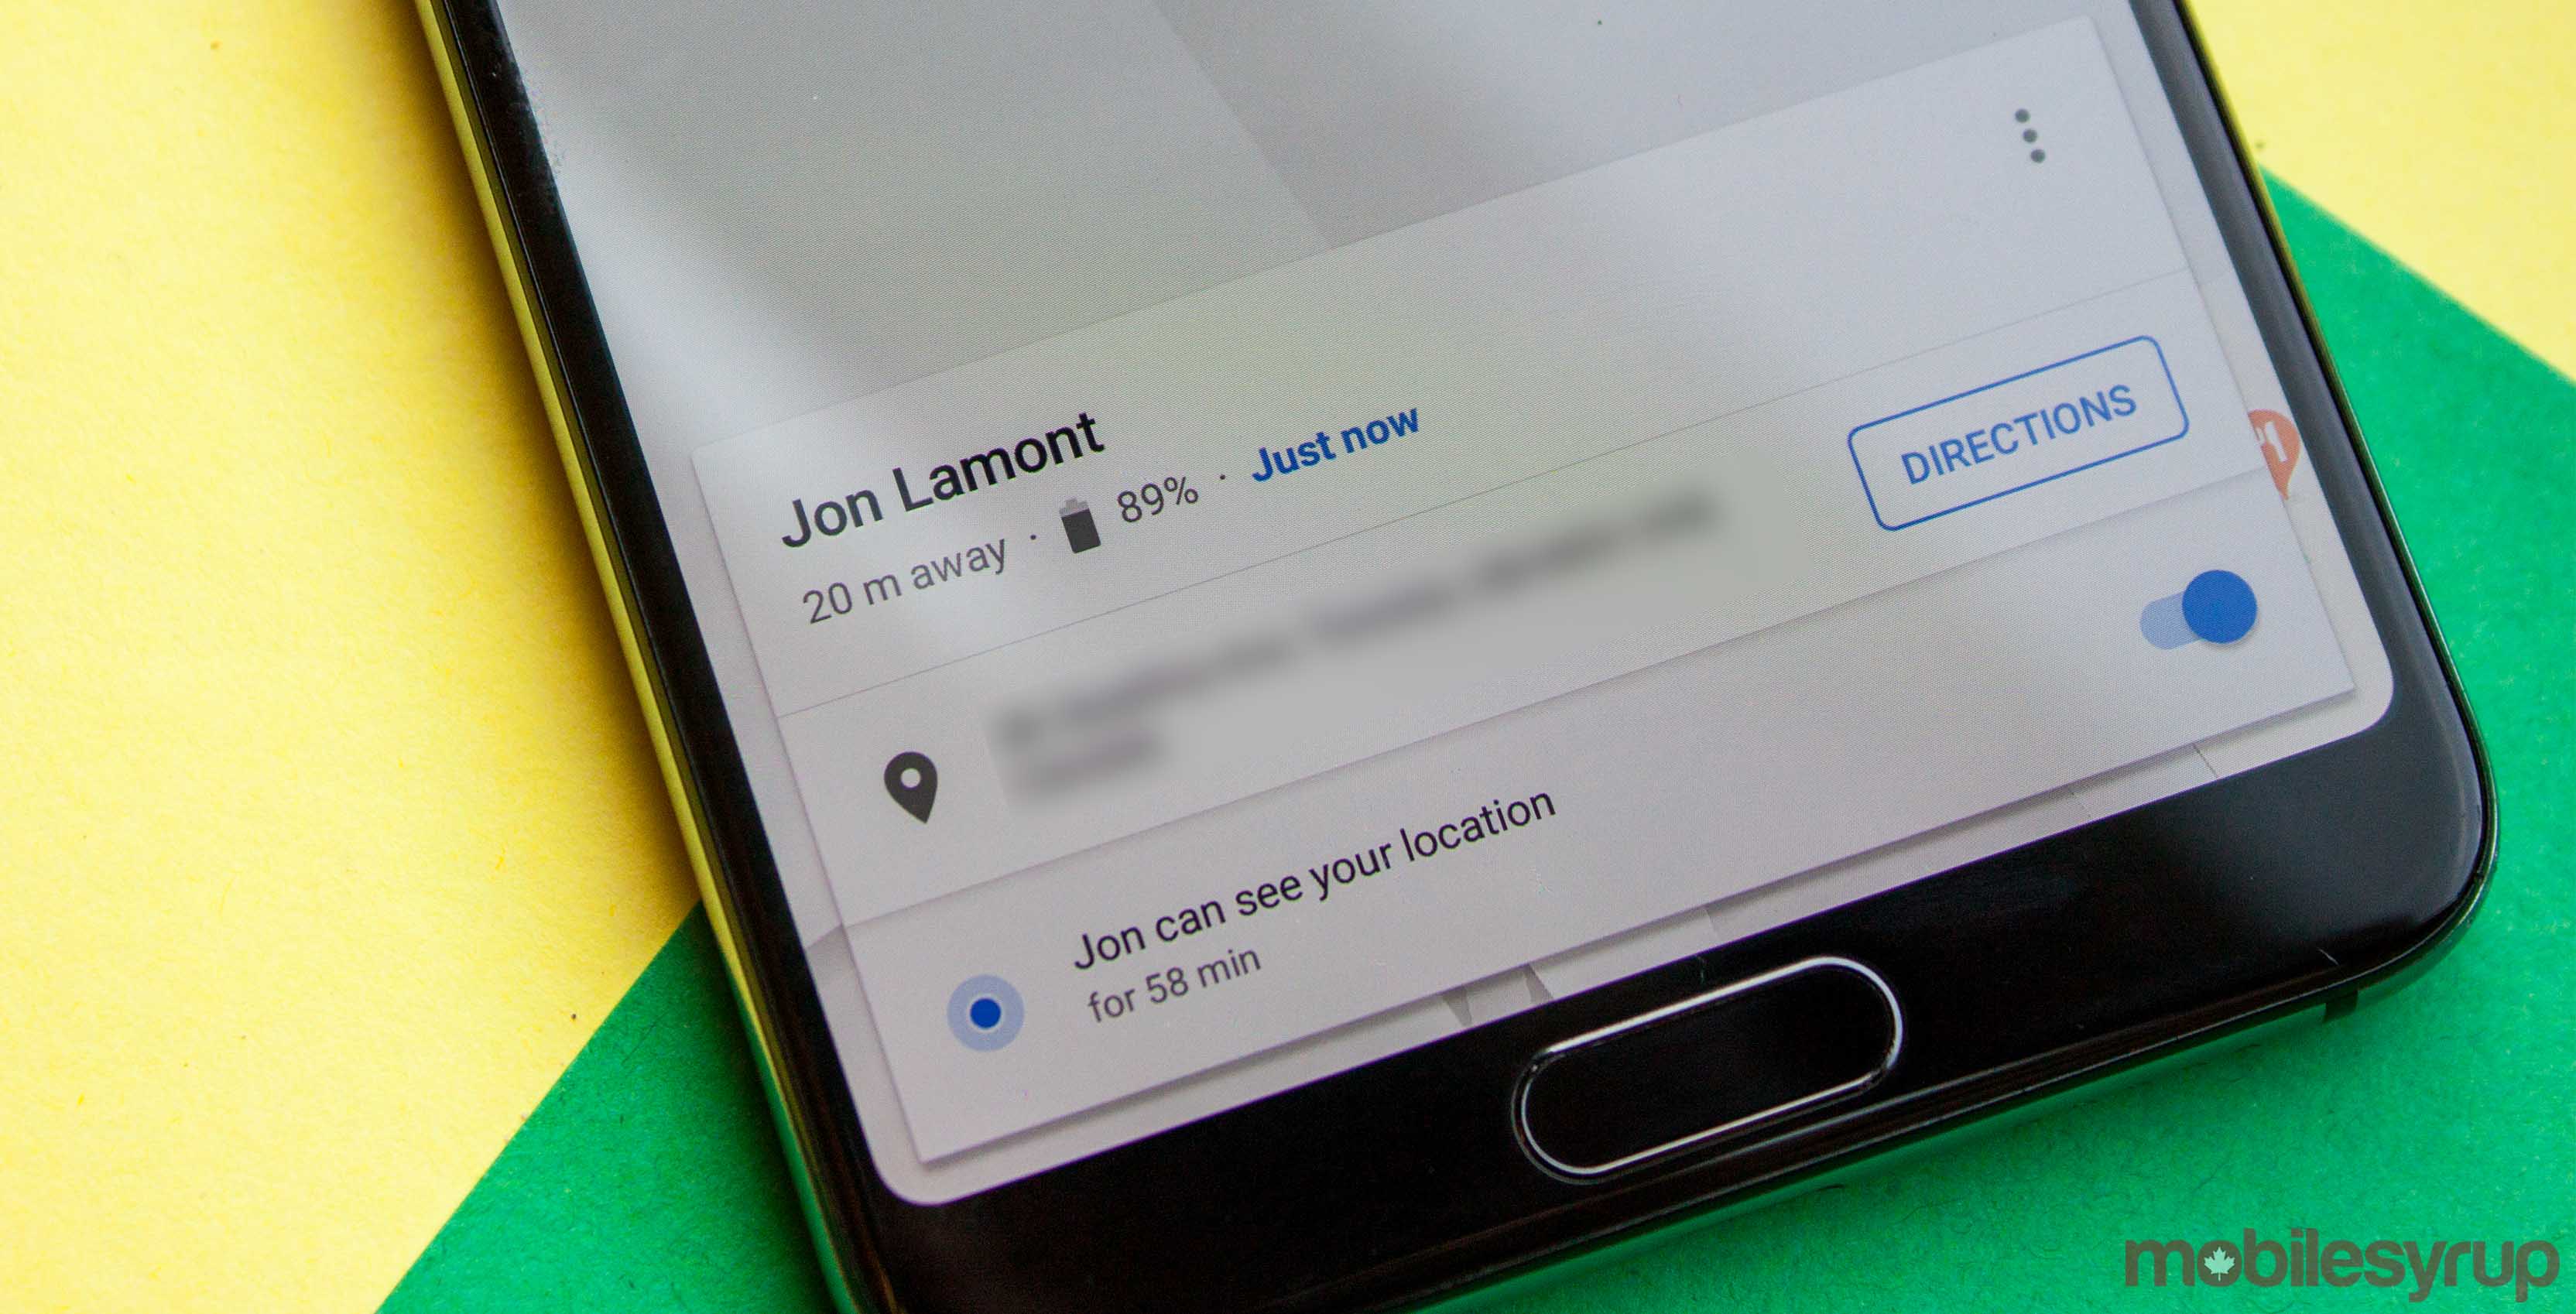 Location sharing reveals your battery charge